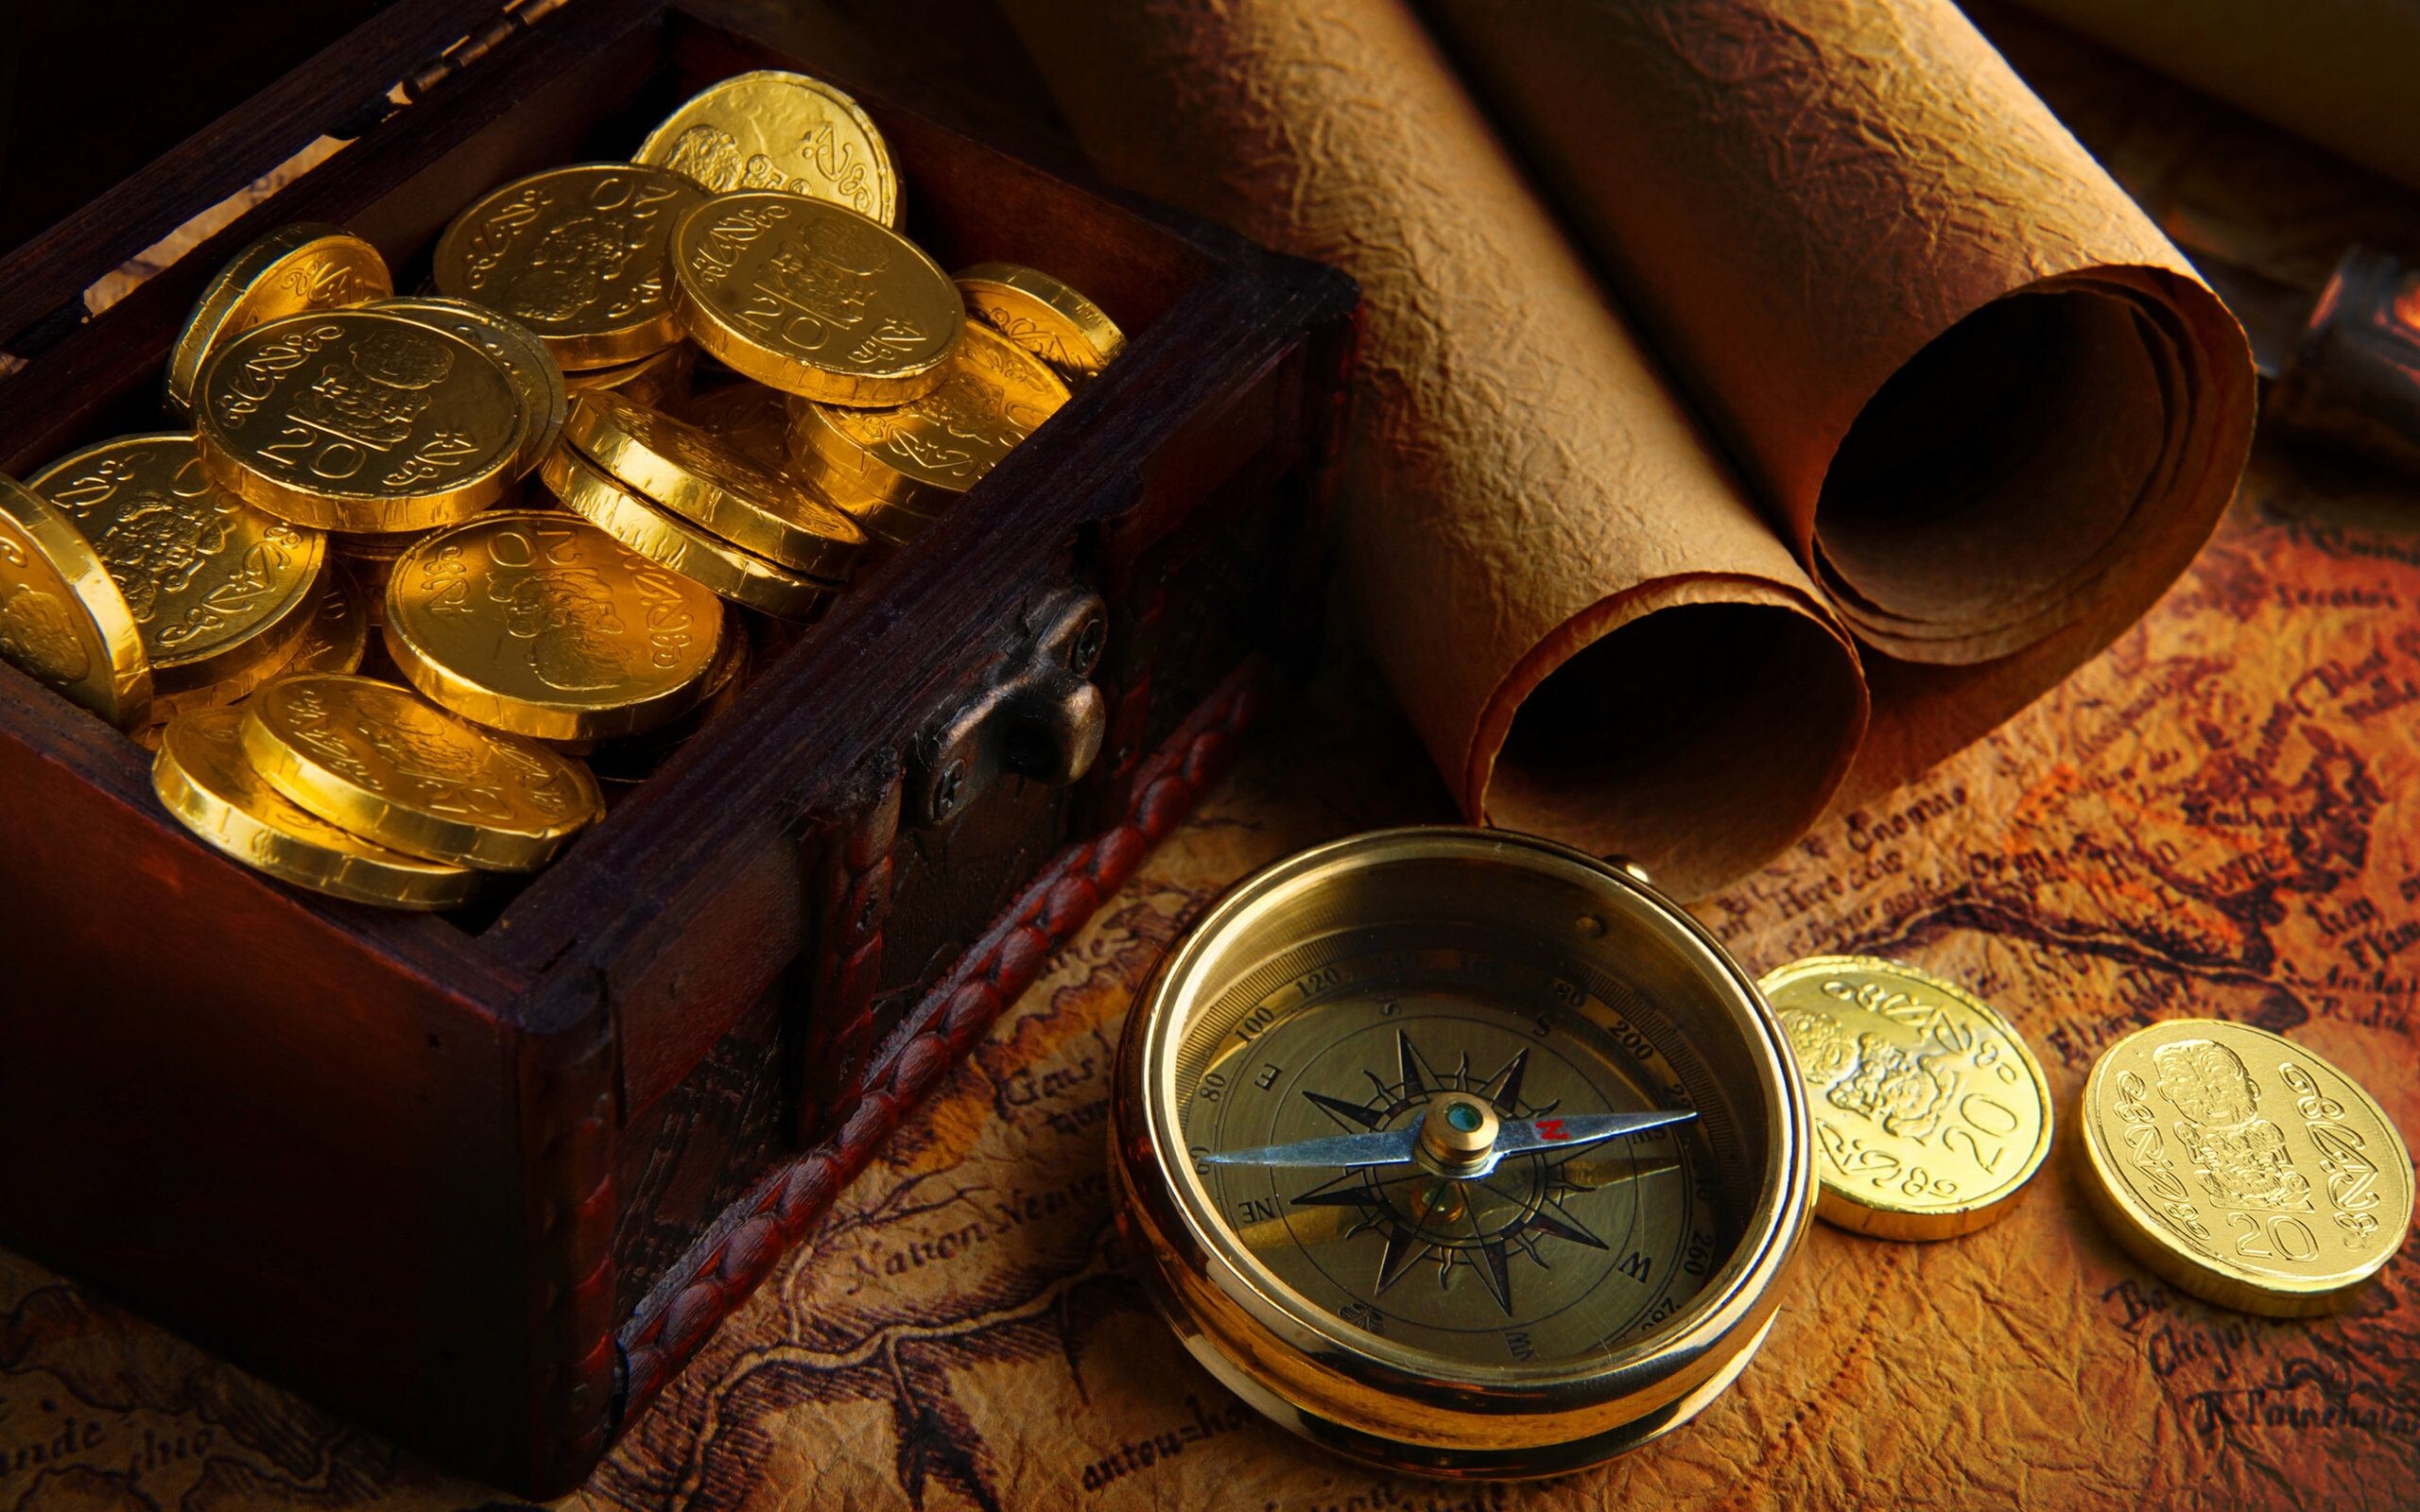 Gold Coins: Collectible coins in a wooden box, Mariner's compass, Navigational instrument. 2560x1600 HD Wallpaper.